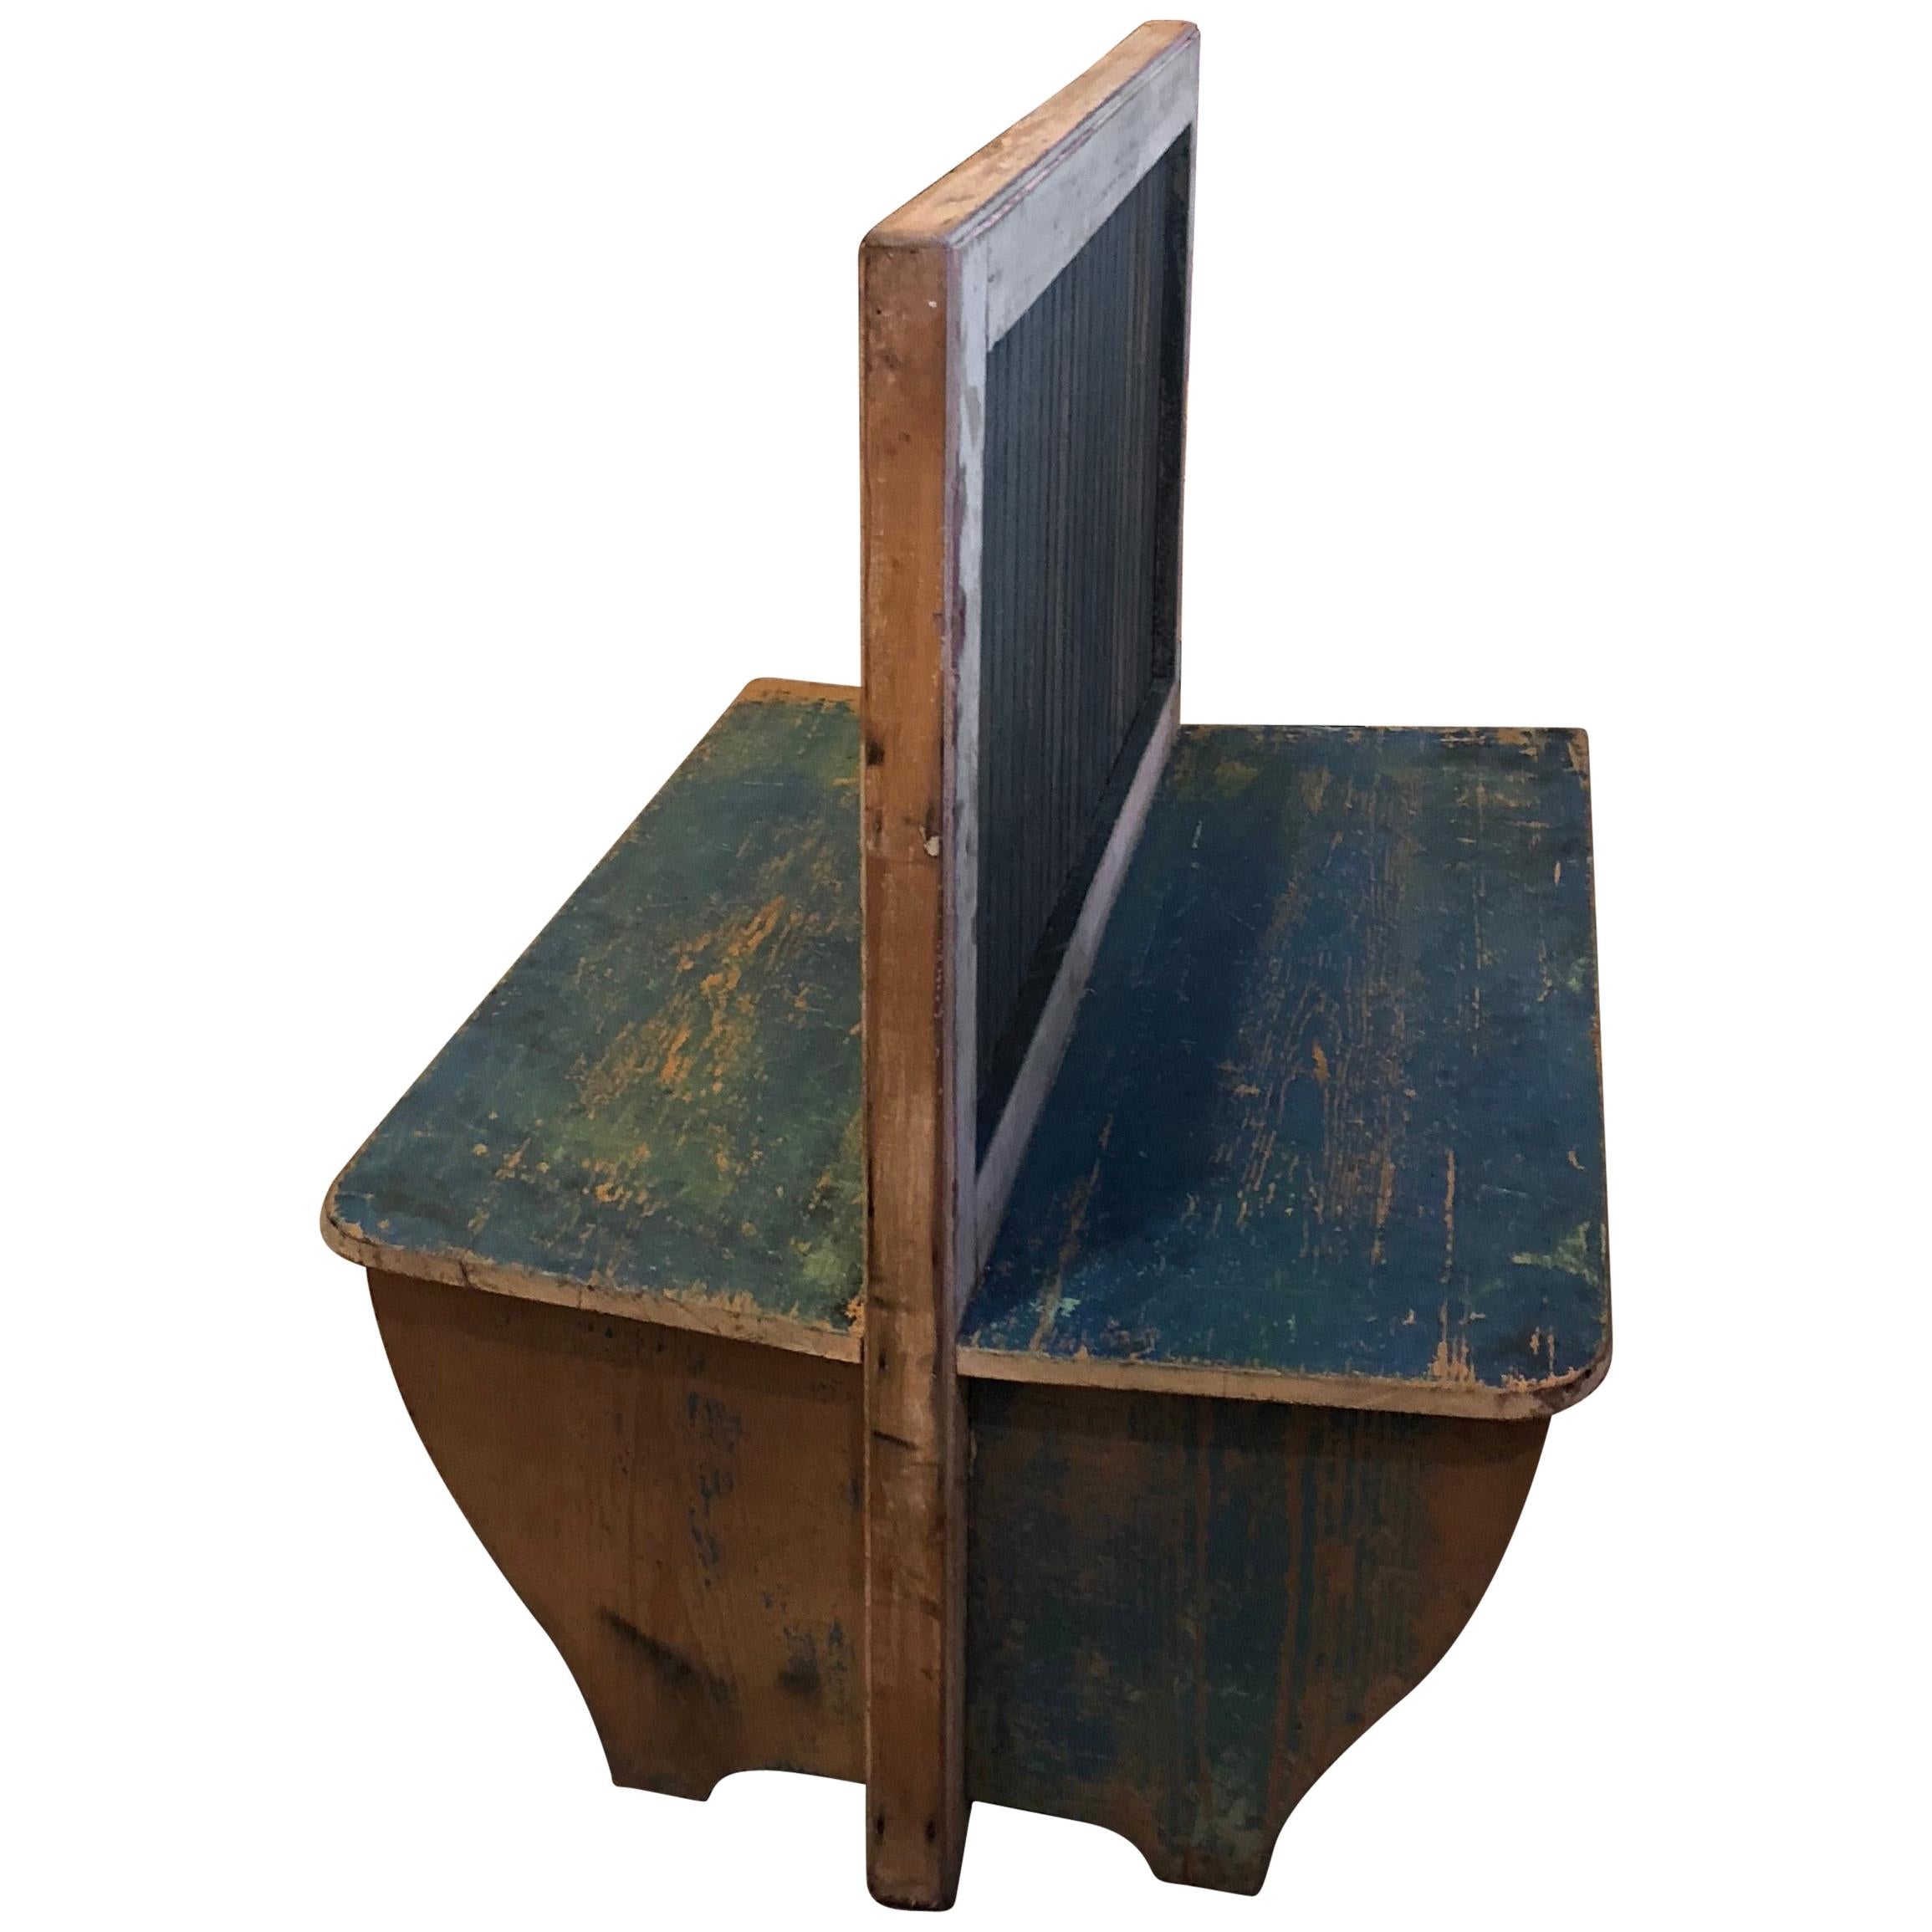 Bench from Train Depot, circa 1900s, 2 Sided with Original Blue Paint